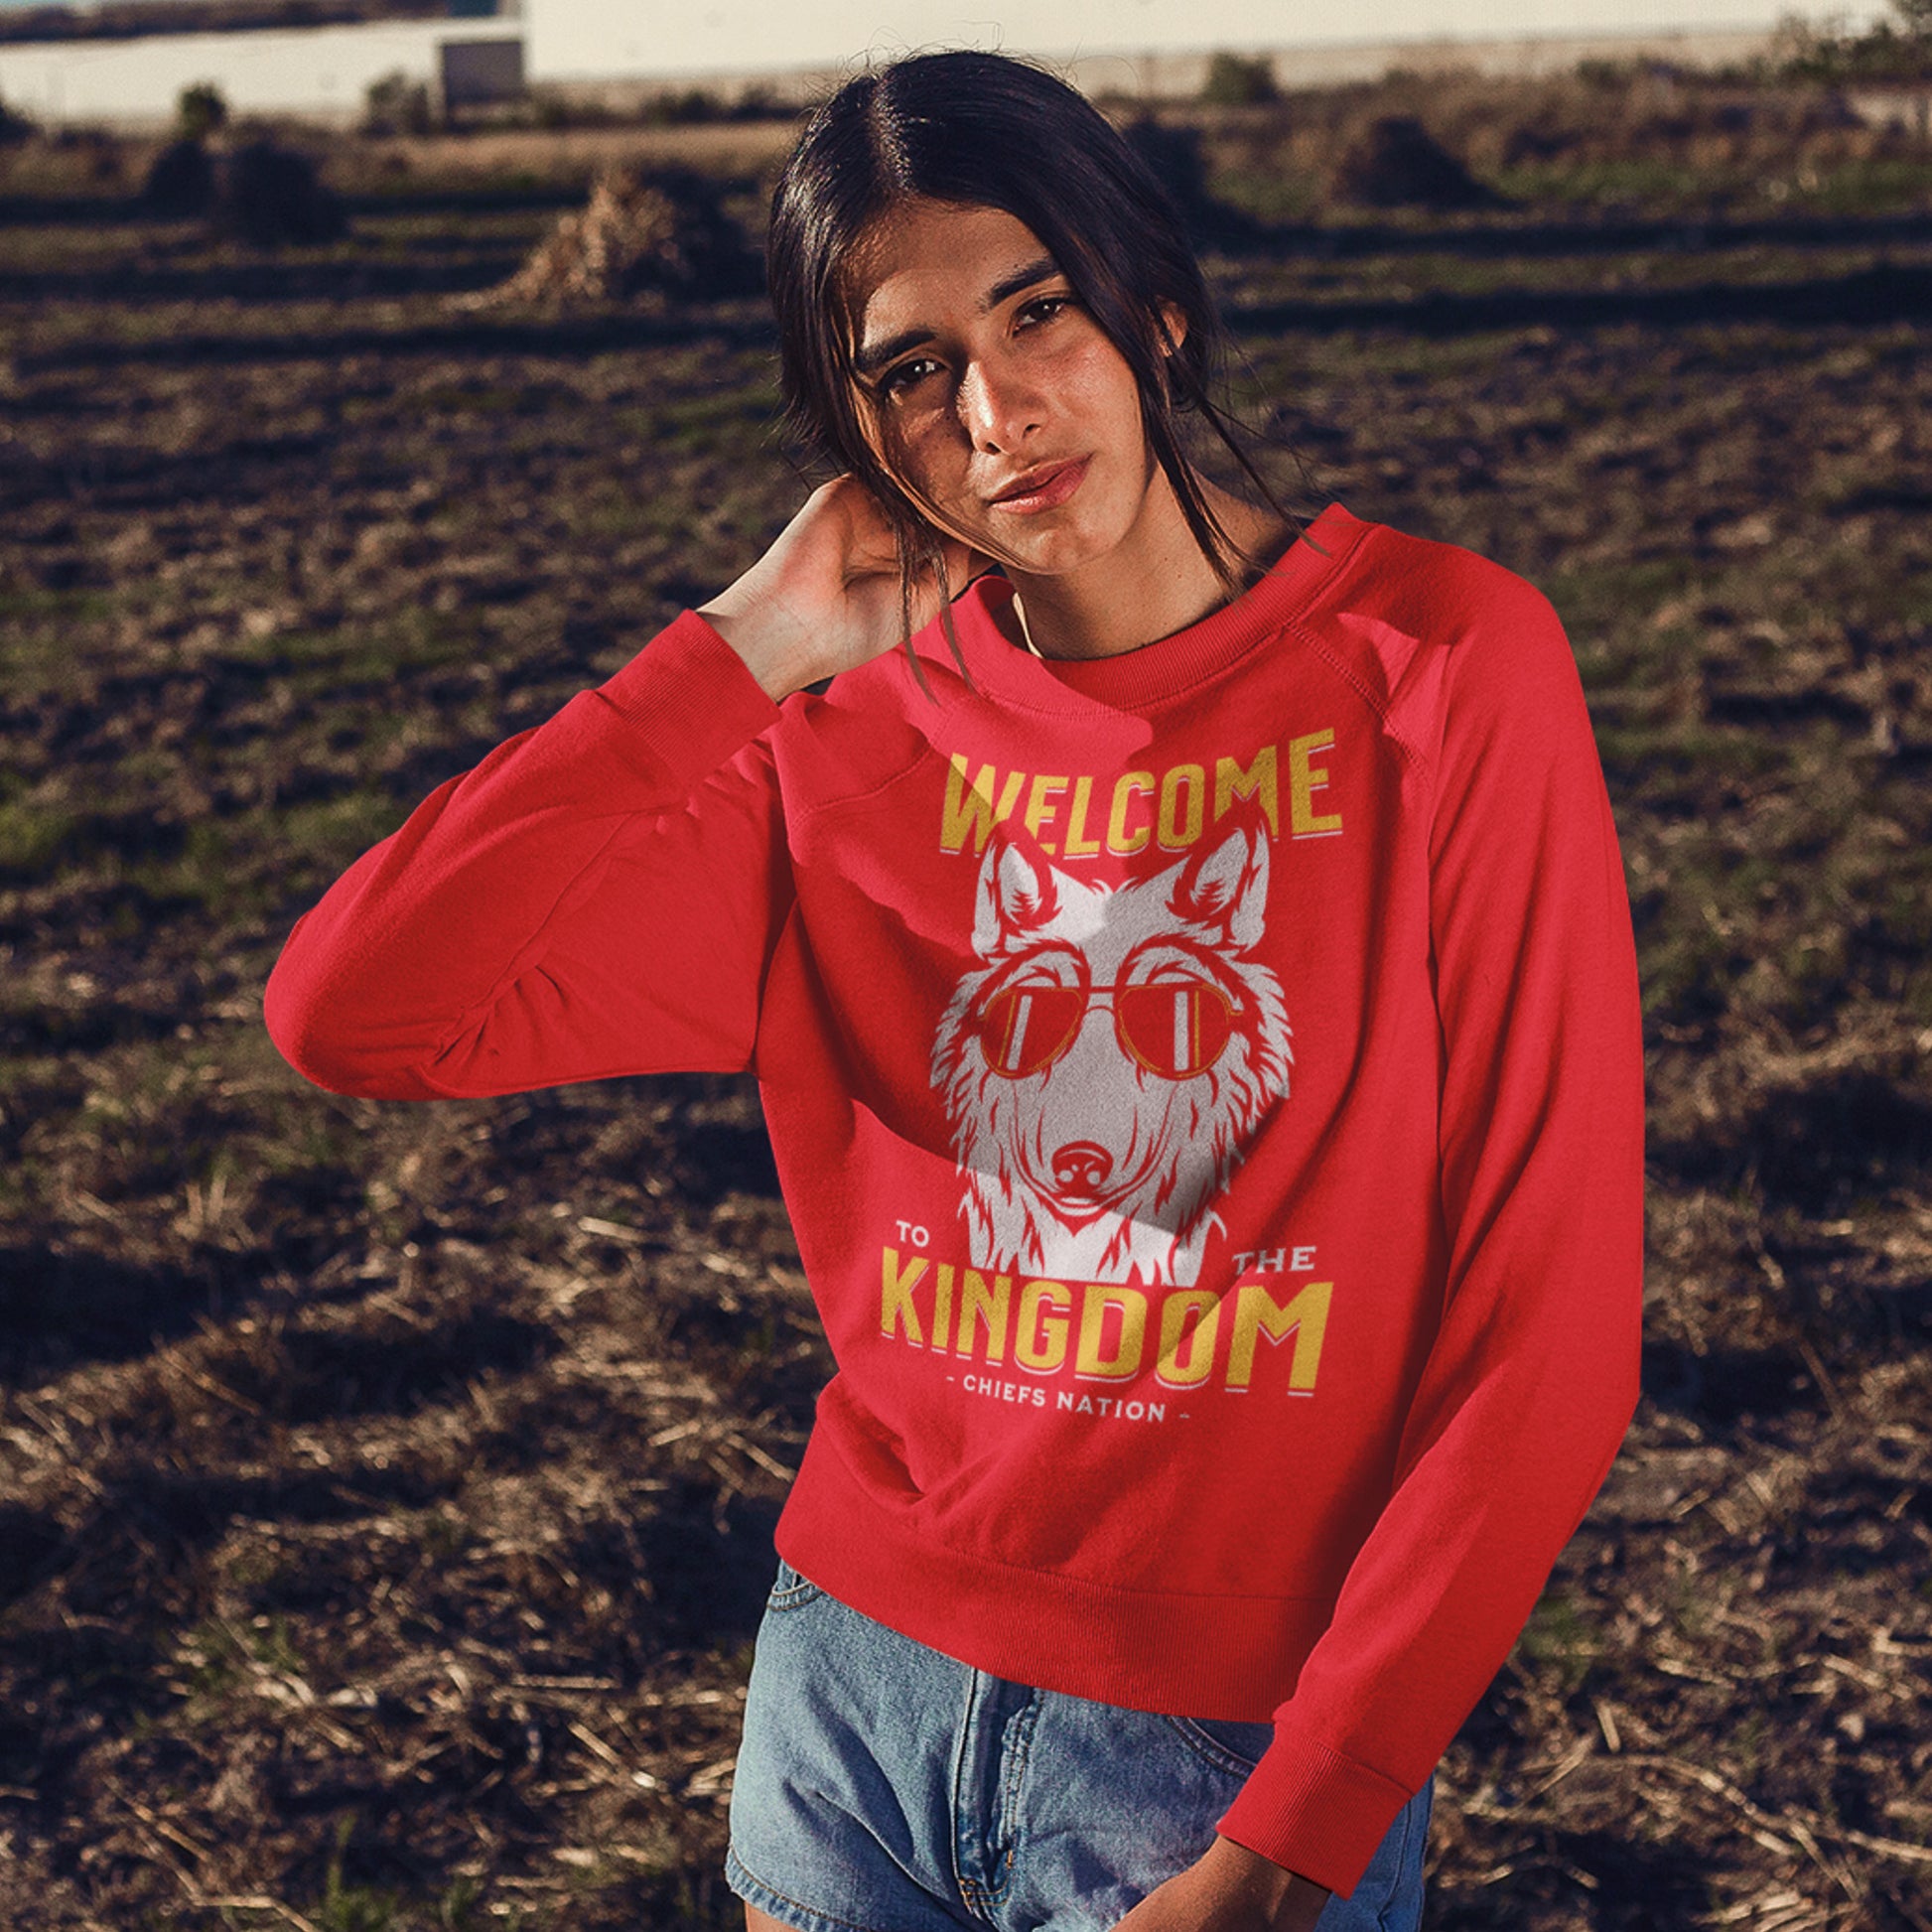 KC Swag Kansas City Chiefs Distressed White & Gold Cool Wolf Kingdom on a Red Crewneck Sweatshirt worn by a dark-haired female m del standing in a barren farmland